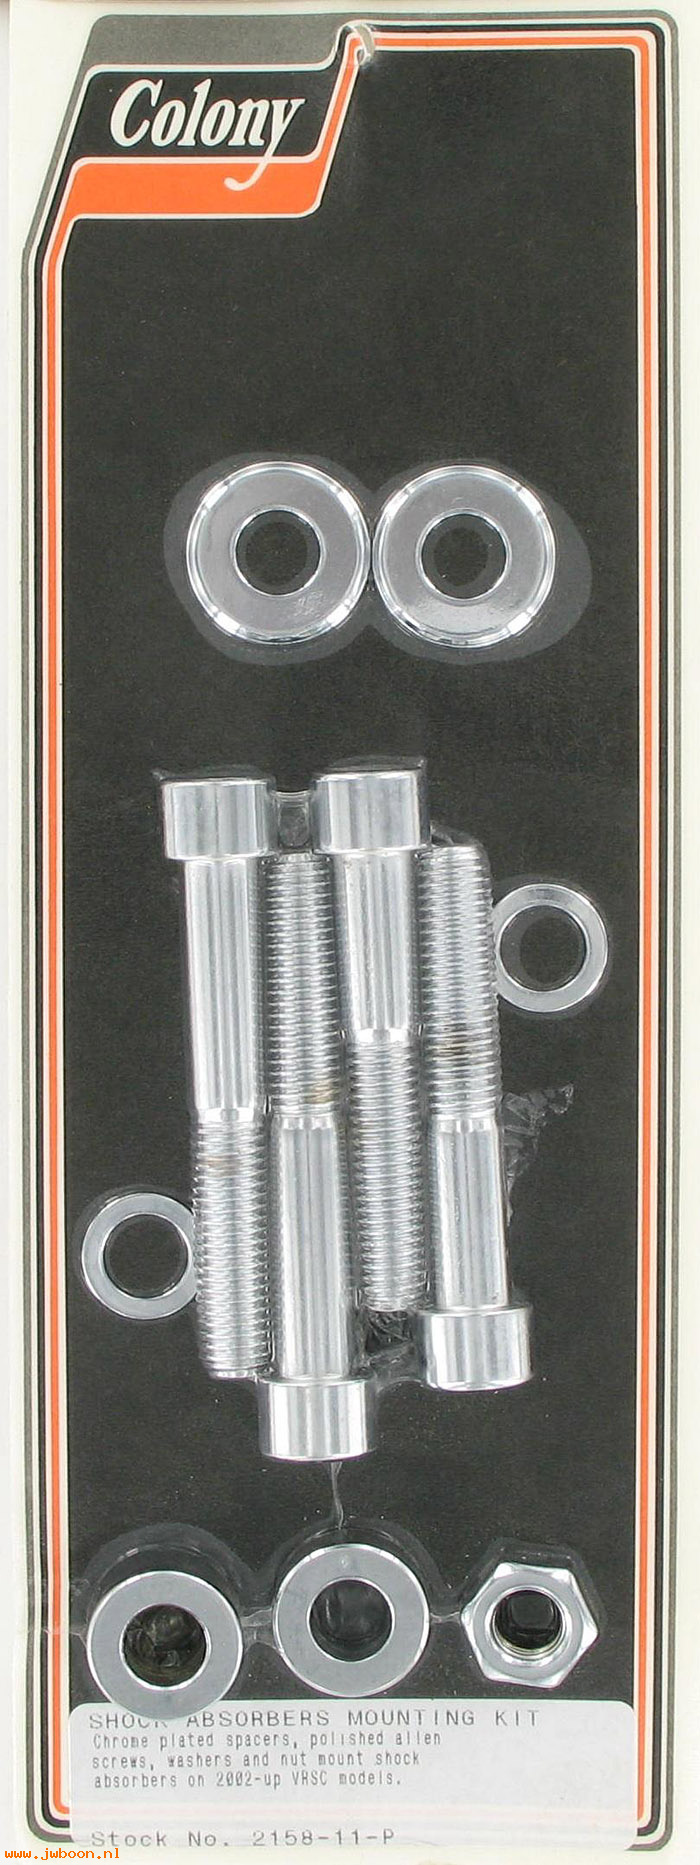 C 2158-11-P (): Shock absorbers mounting kit - polished - V-rod '02-'05, in stock